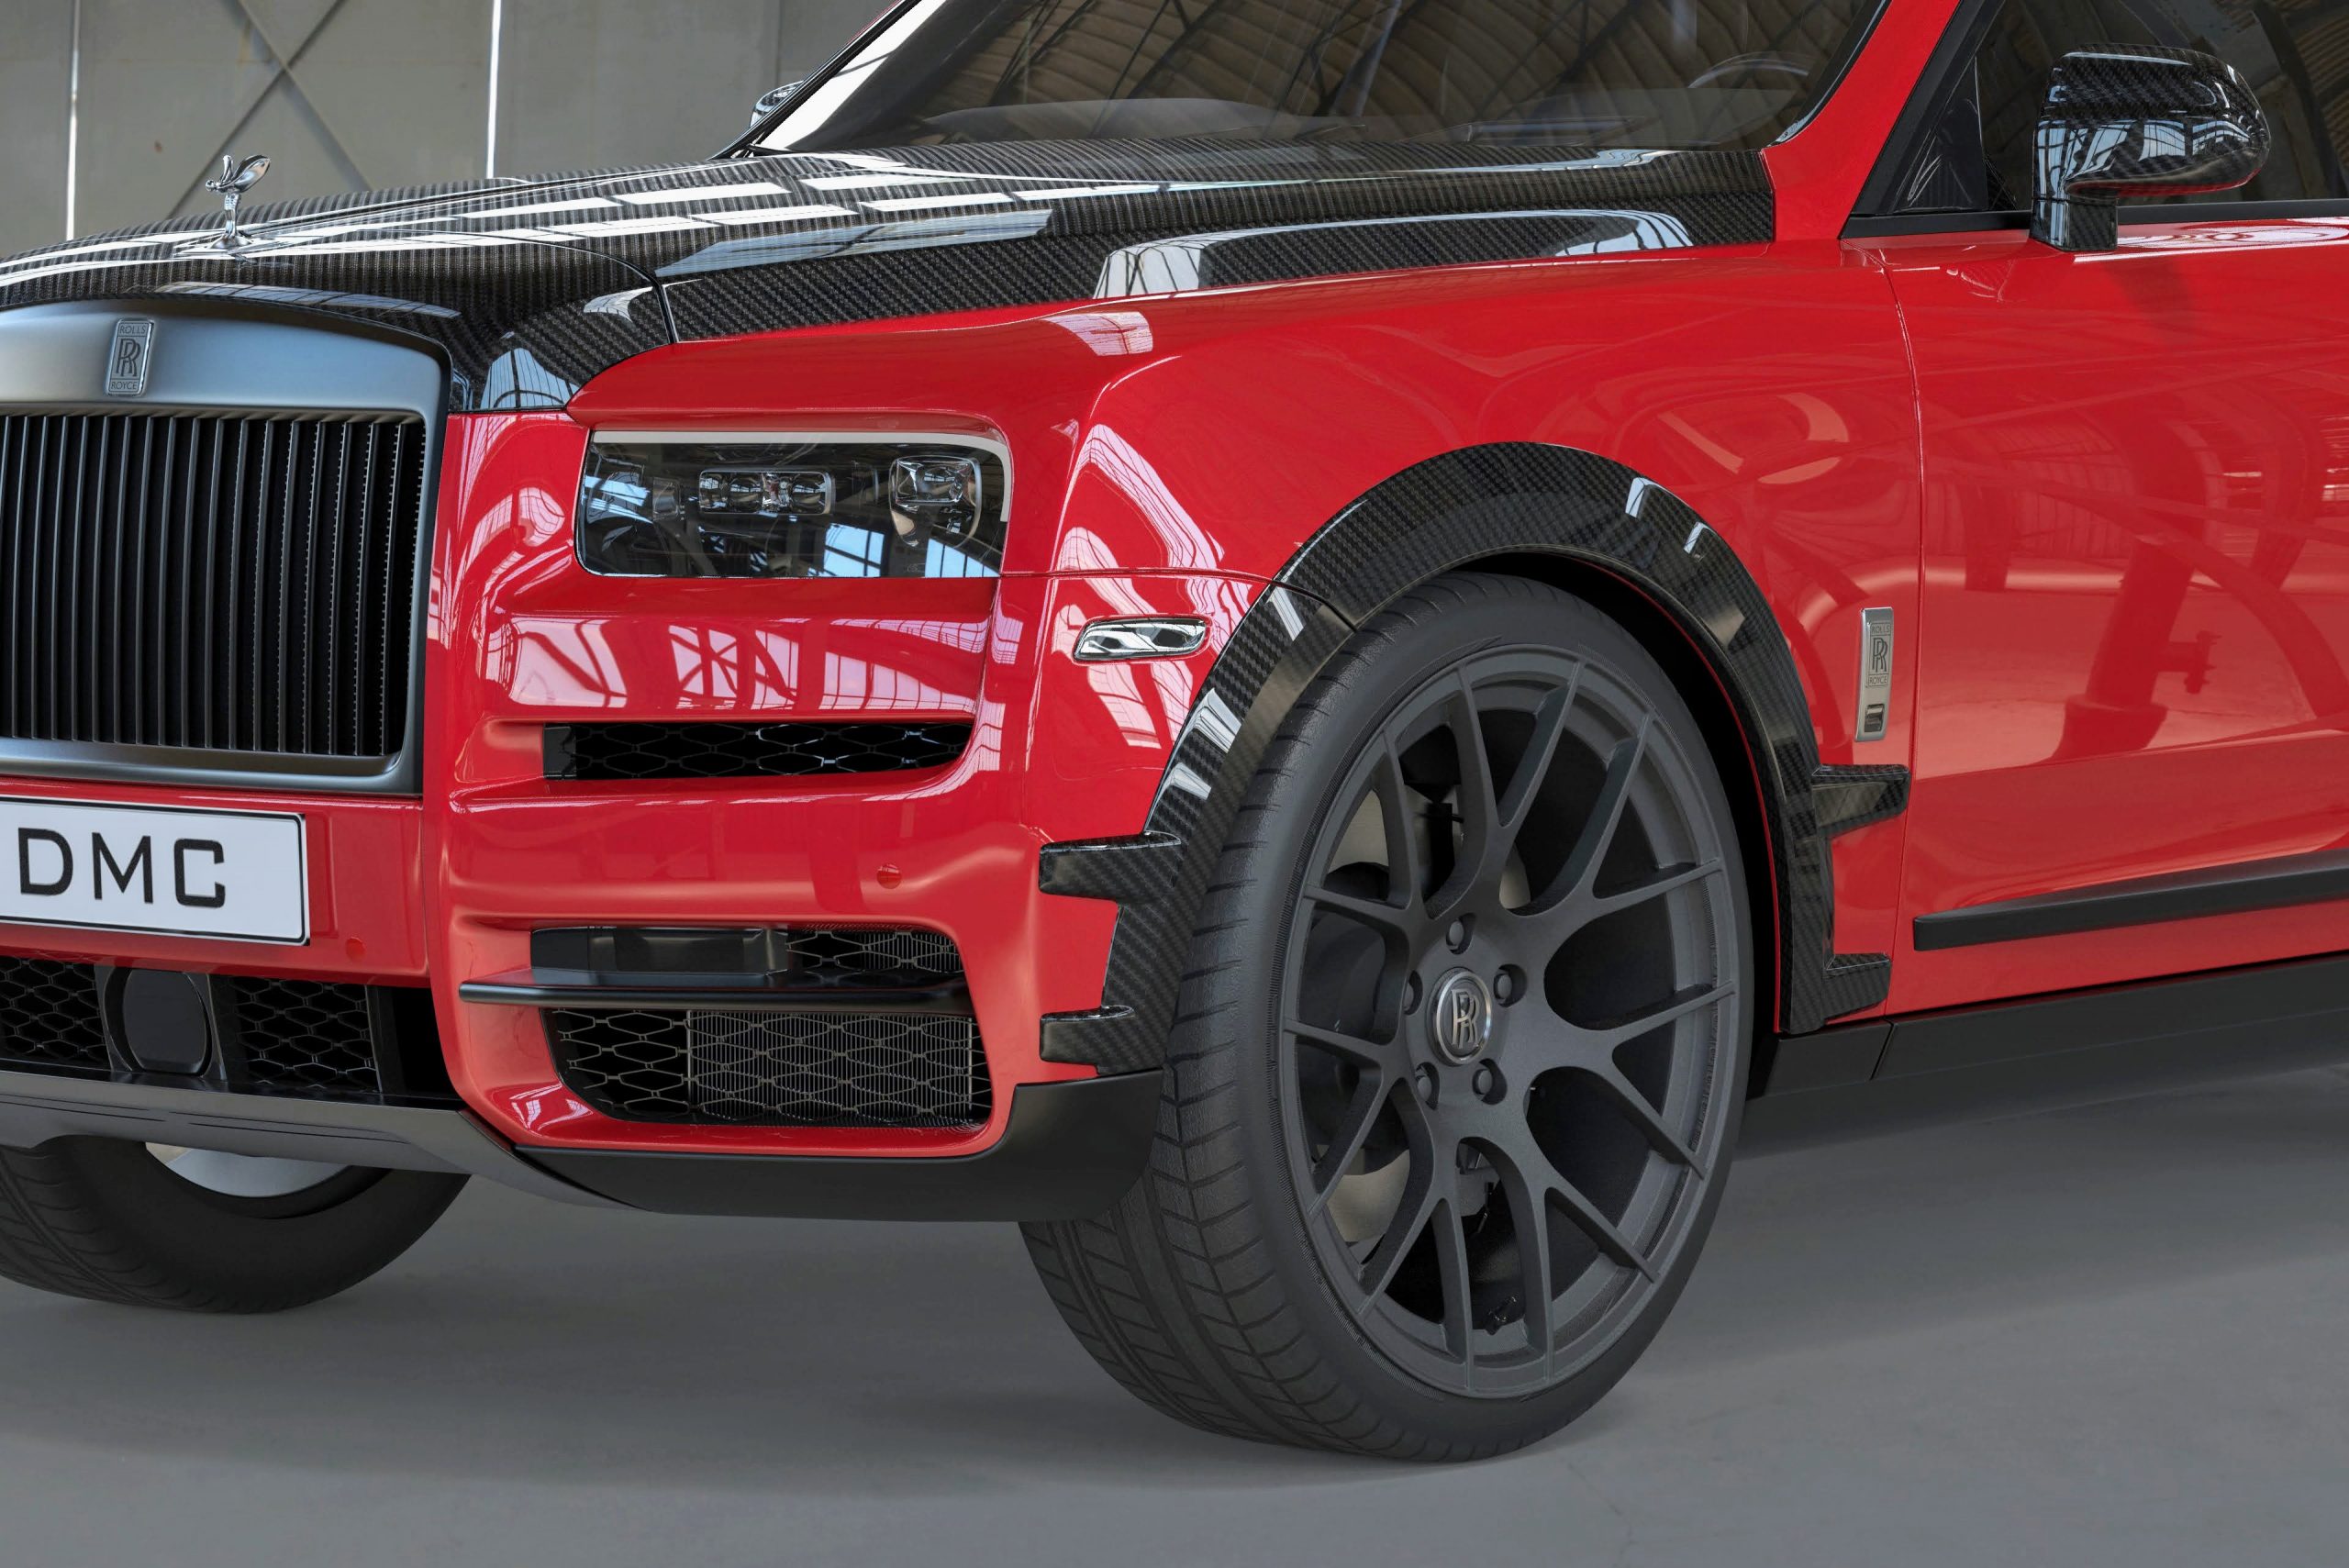 Rolls Royce Cullinan Wide Body Modified: Front View: Carbon Fiber Wide Body Wheel Arches